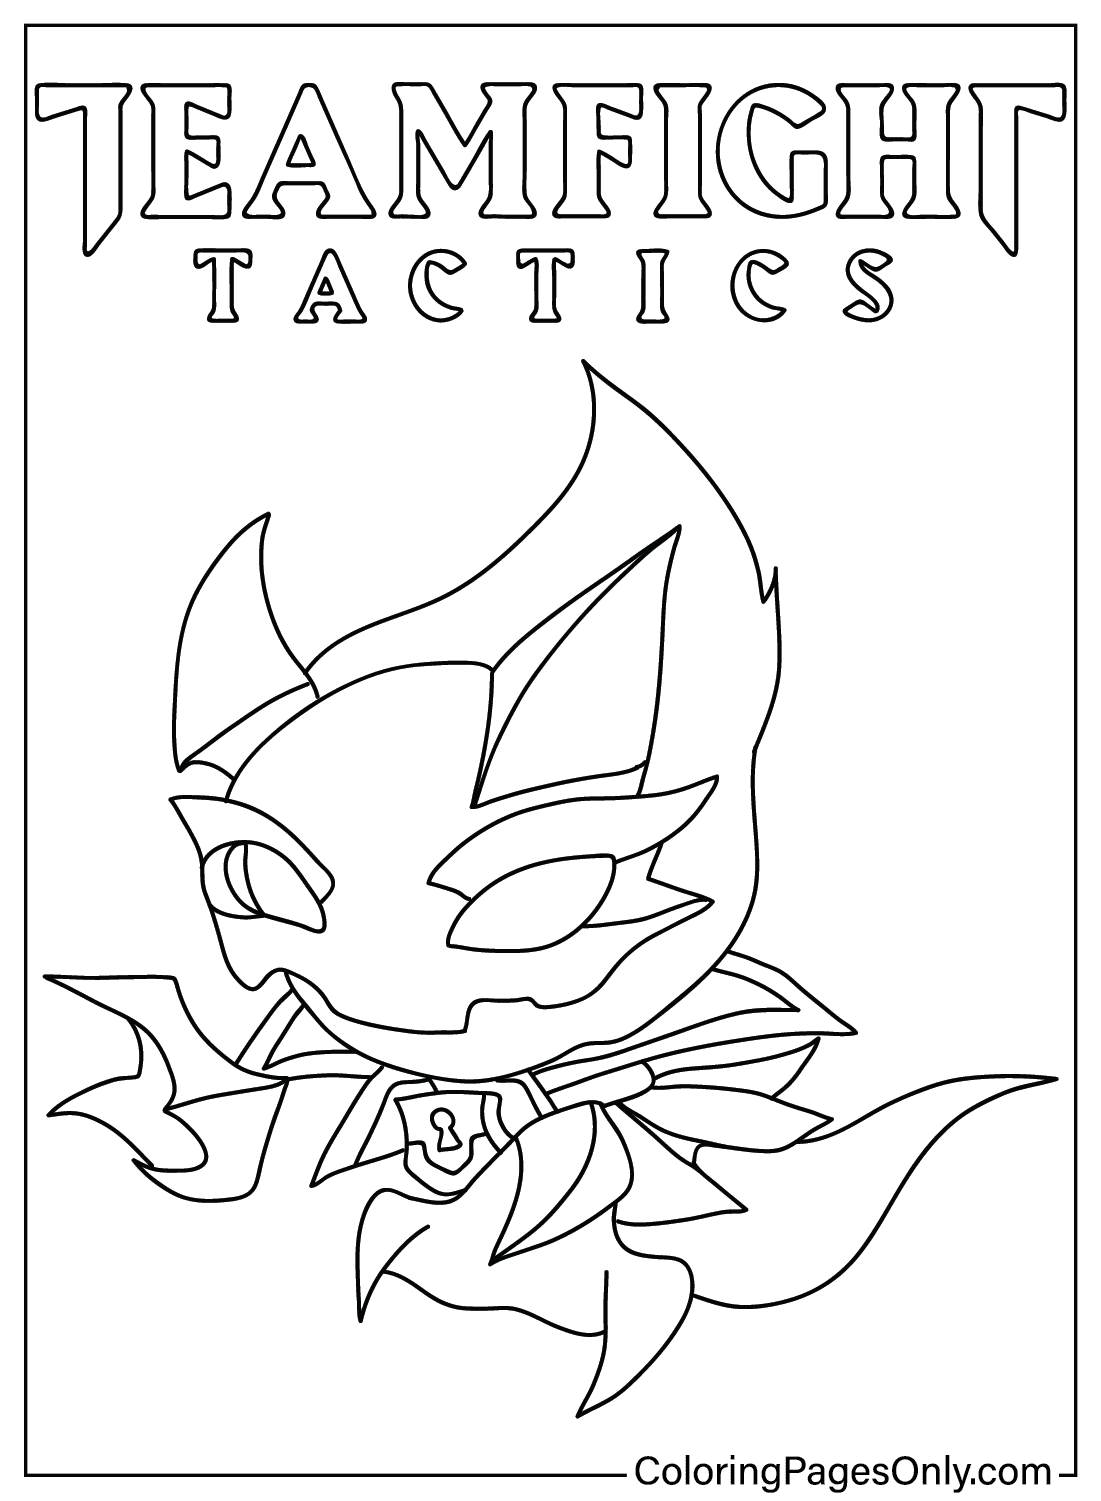 Teamfight Tactics Coloring Page Free from Teamfight Tactics